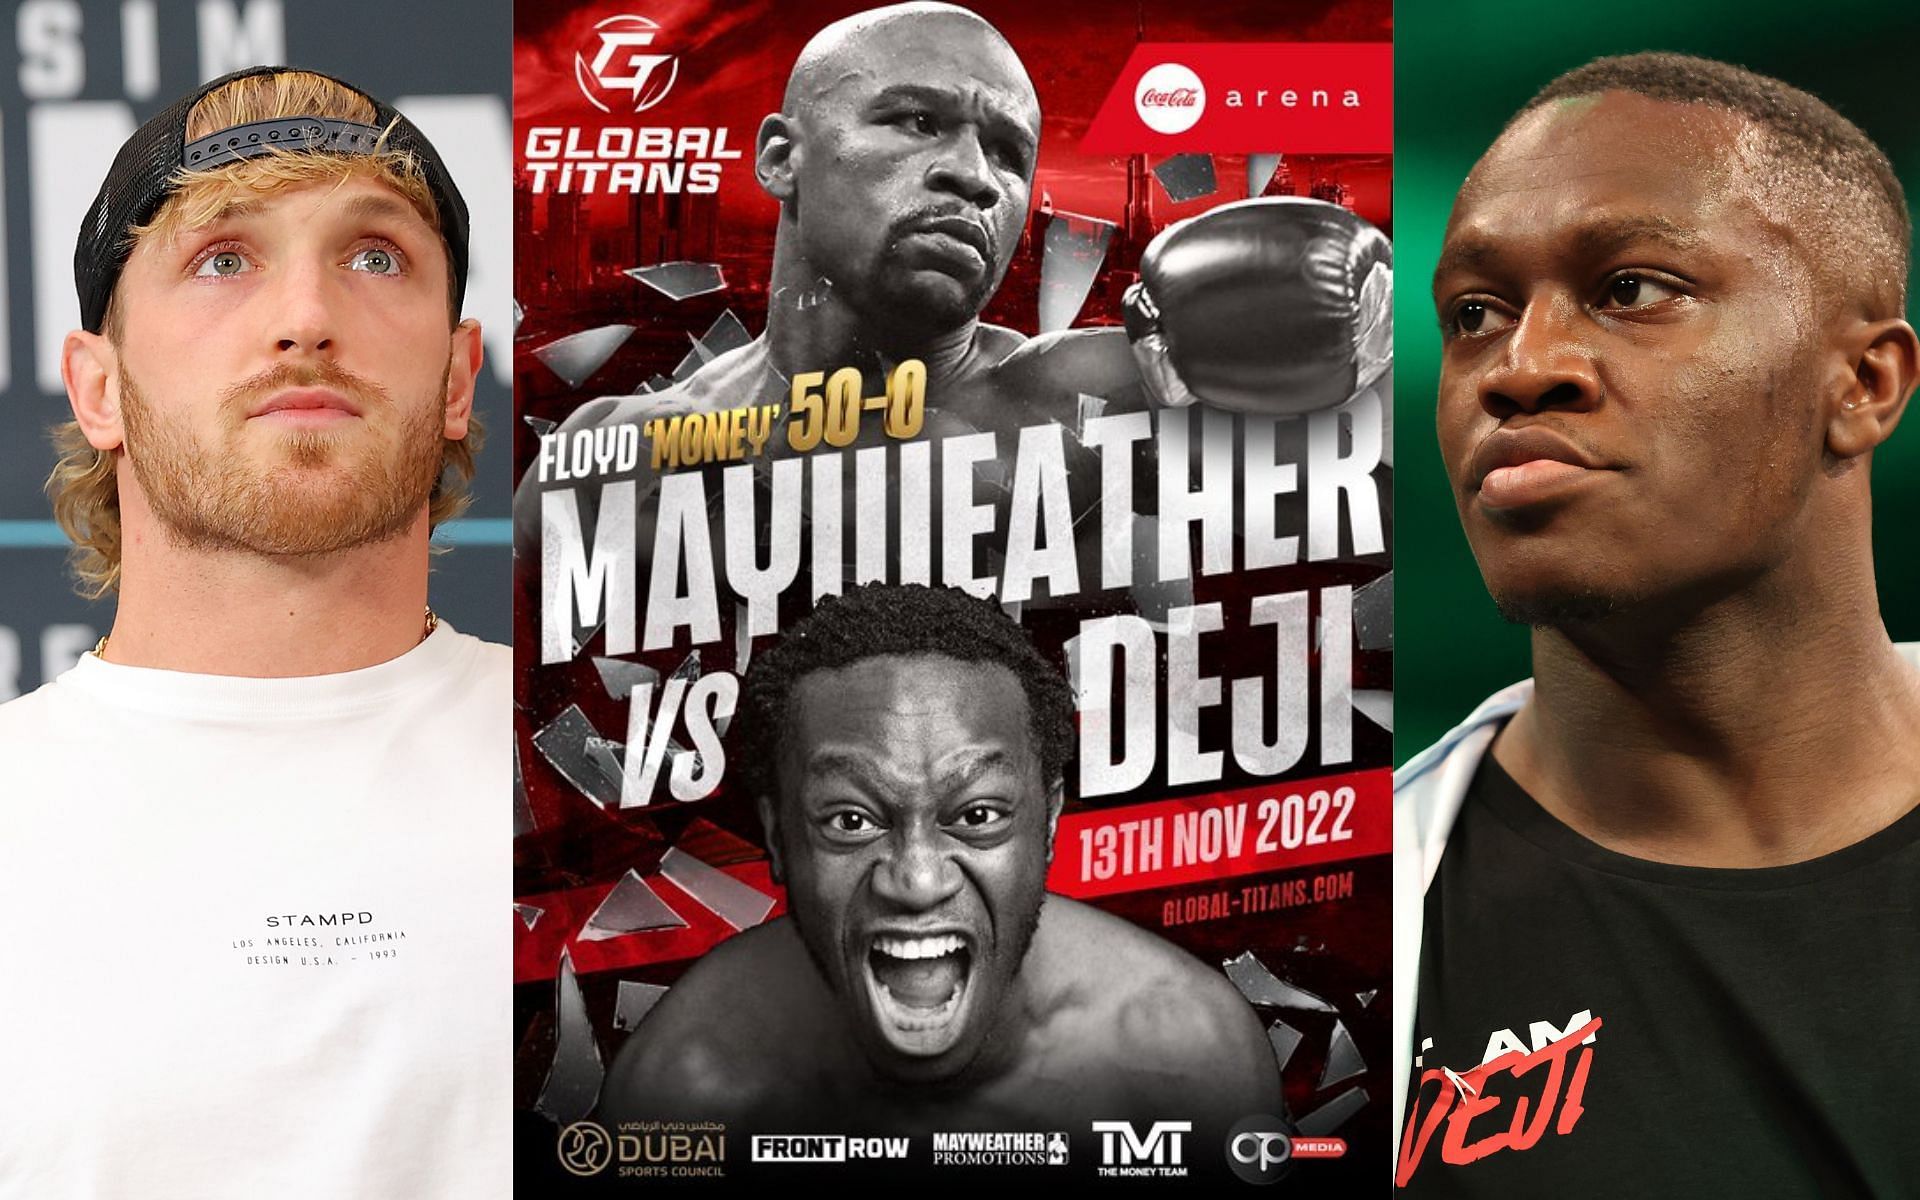 Logan Paul (left), Deji vs. Floyd Mayweather fight announcement poster (center), and Deji (right) (Image credits Getty Images and @deji on Twitter)